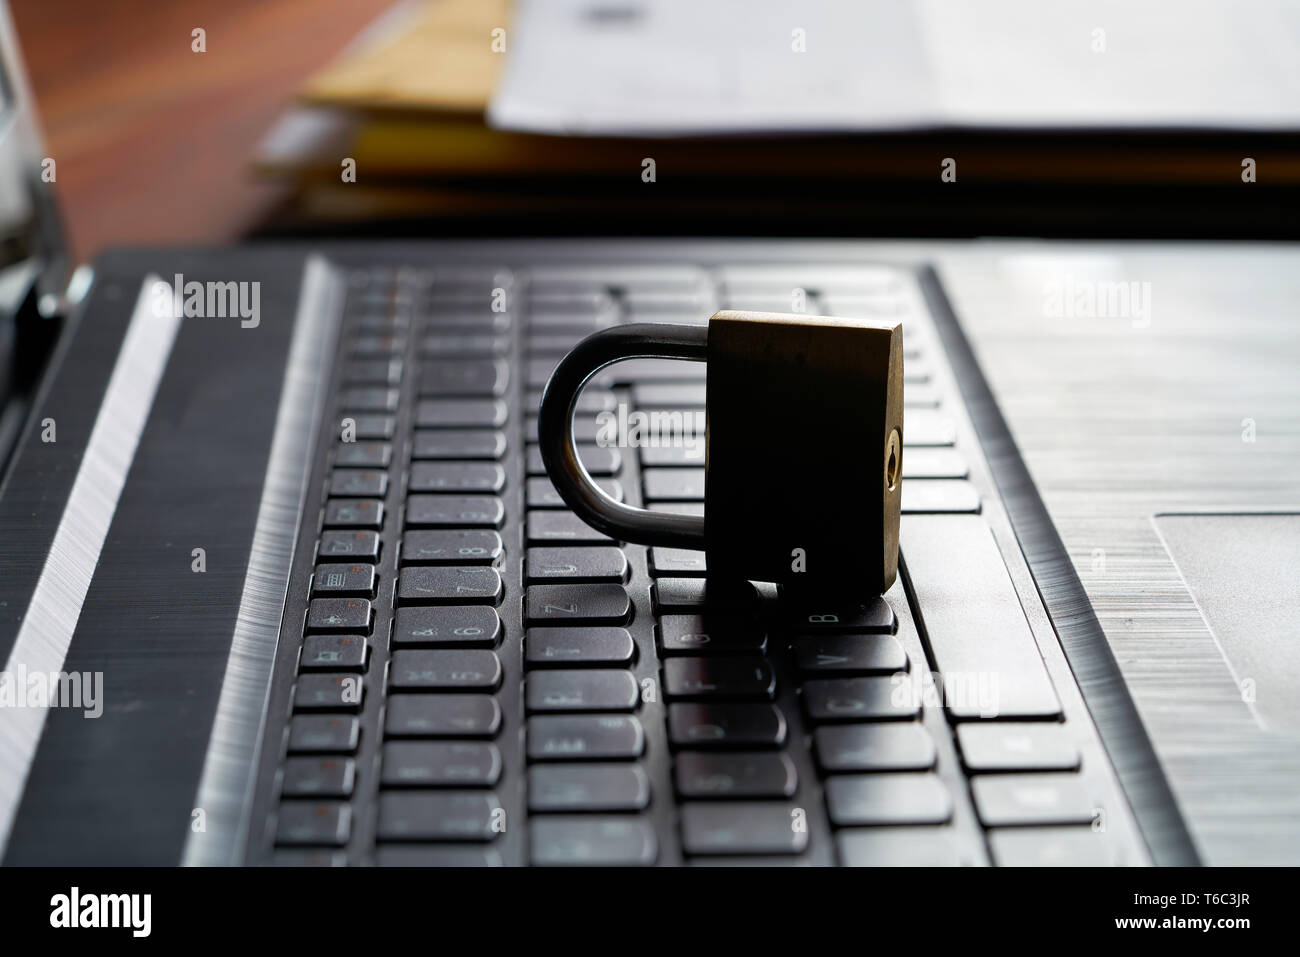 Computer keyboard and padlock as a symbol of Internet security Stock Photo